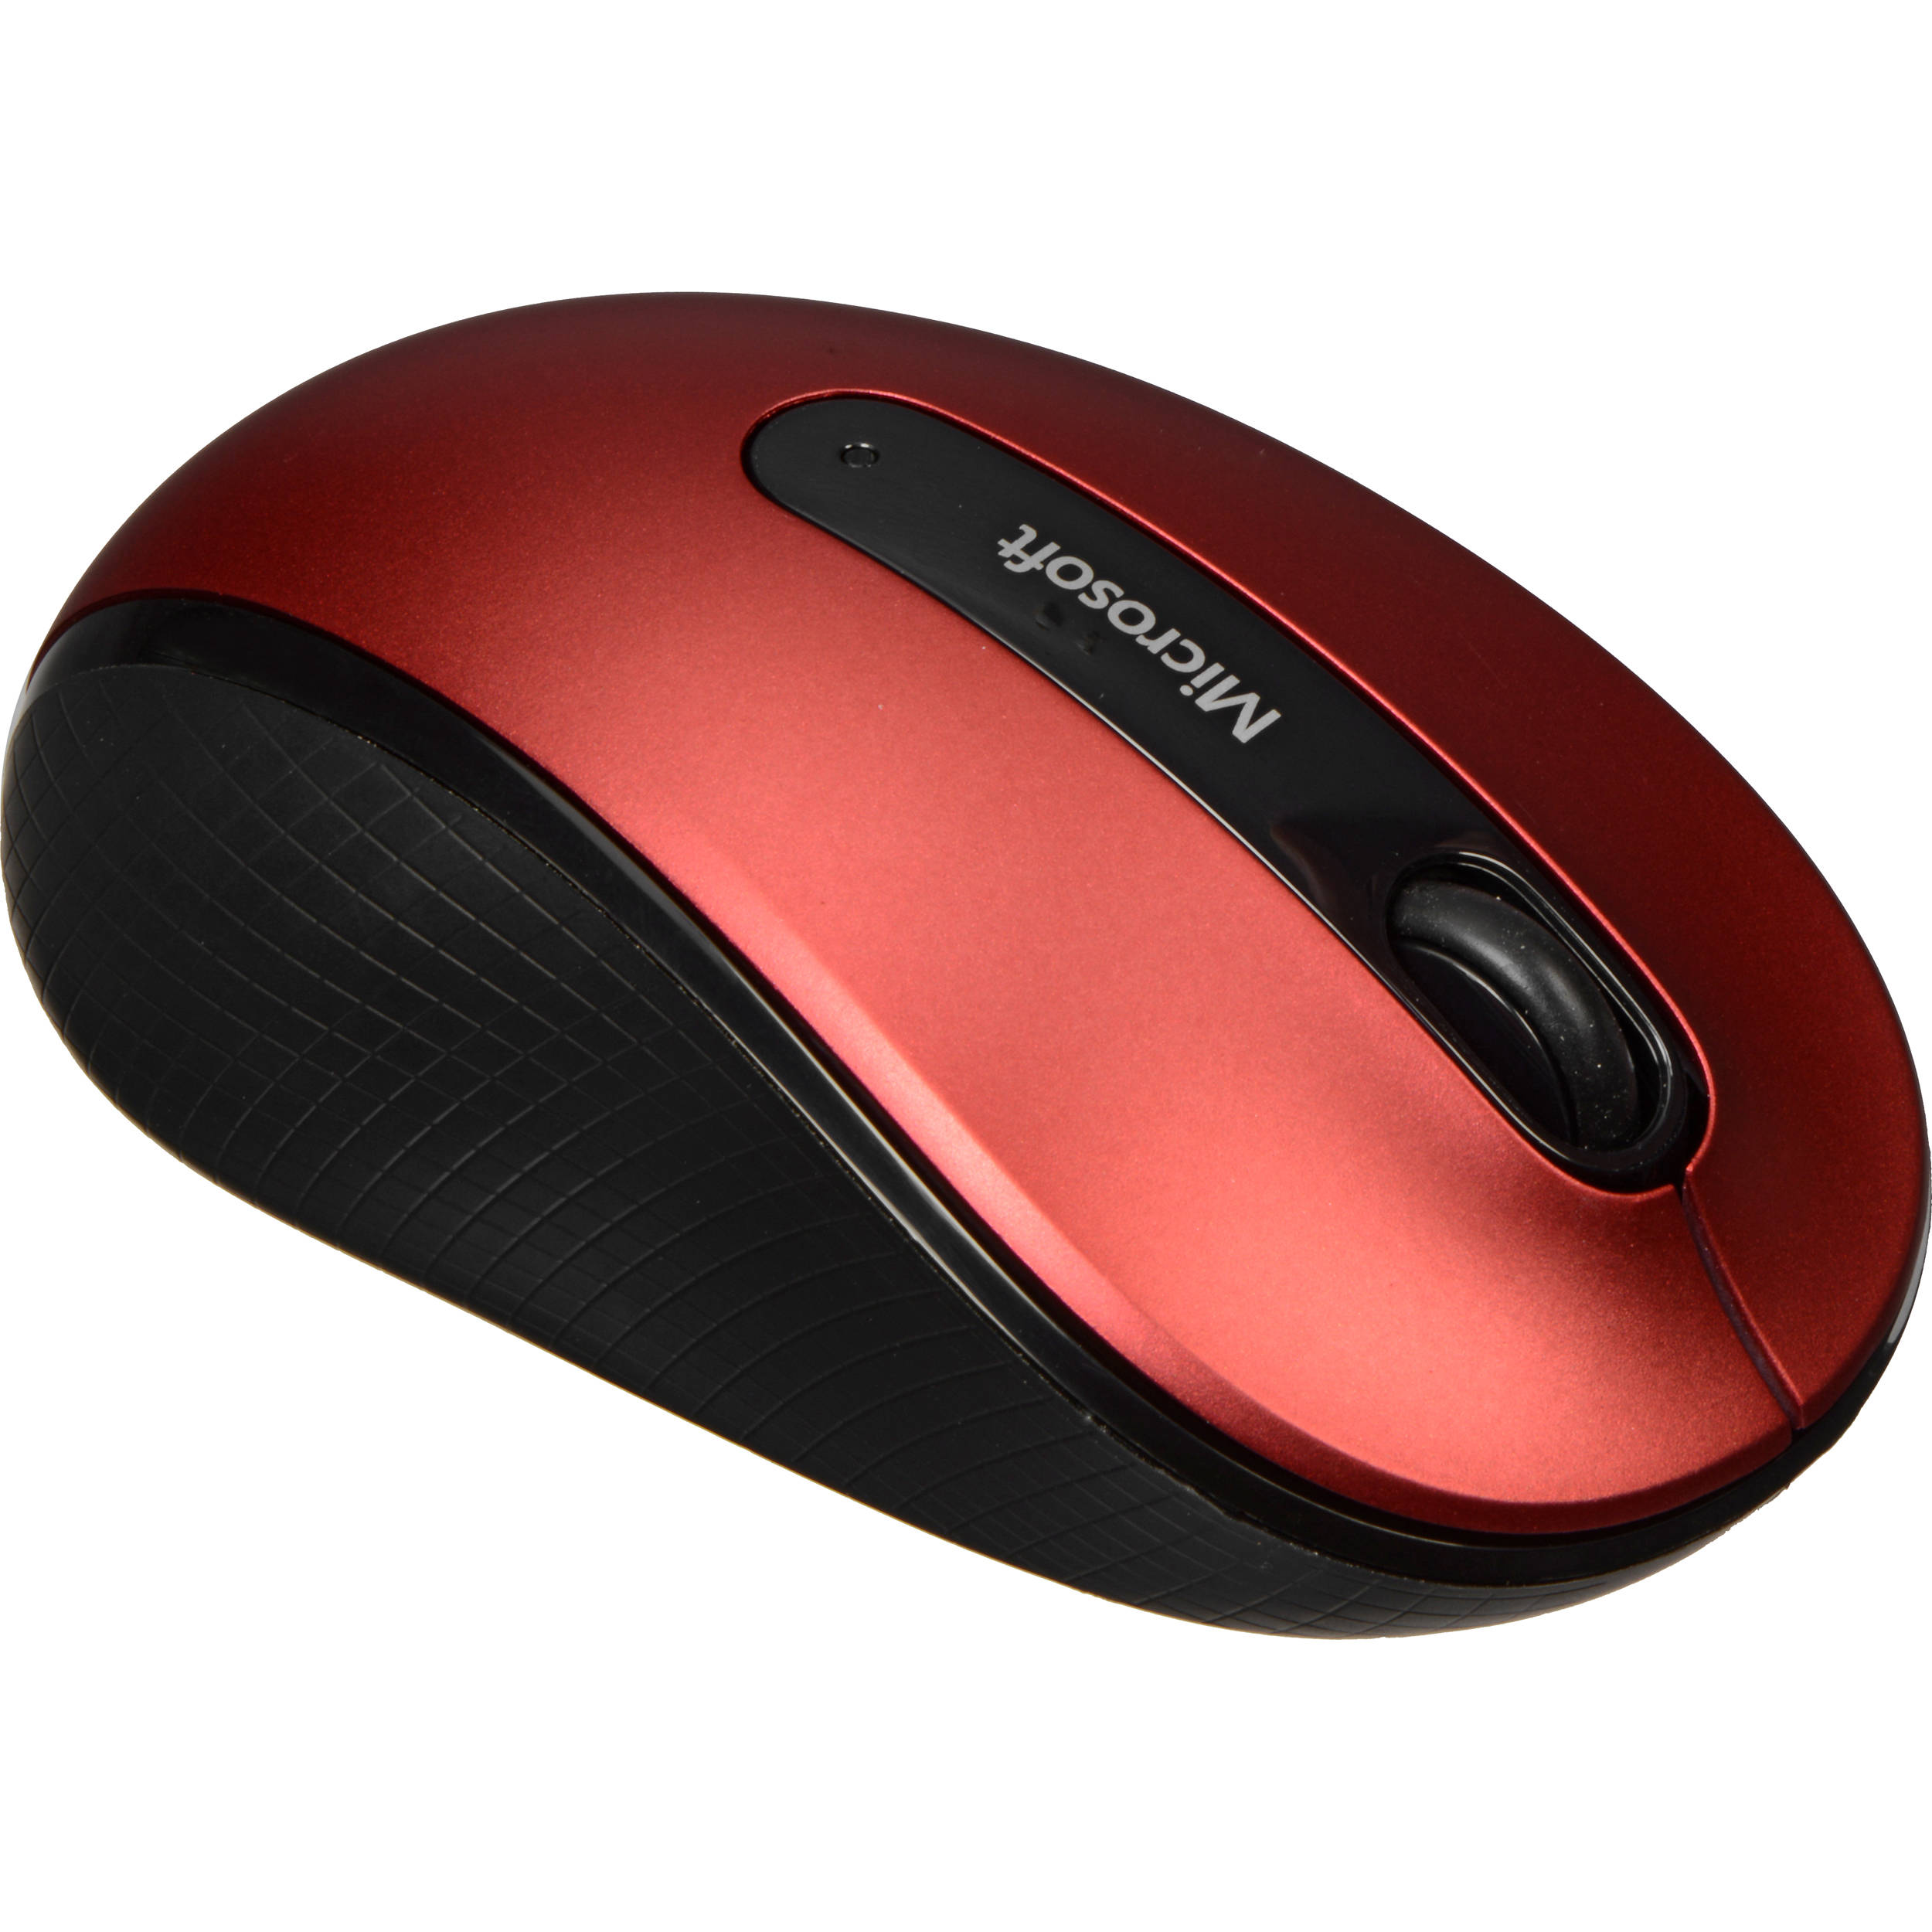 Microsoft wireless notebook optical mouse 4000 driver free download